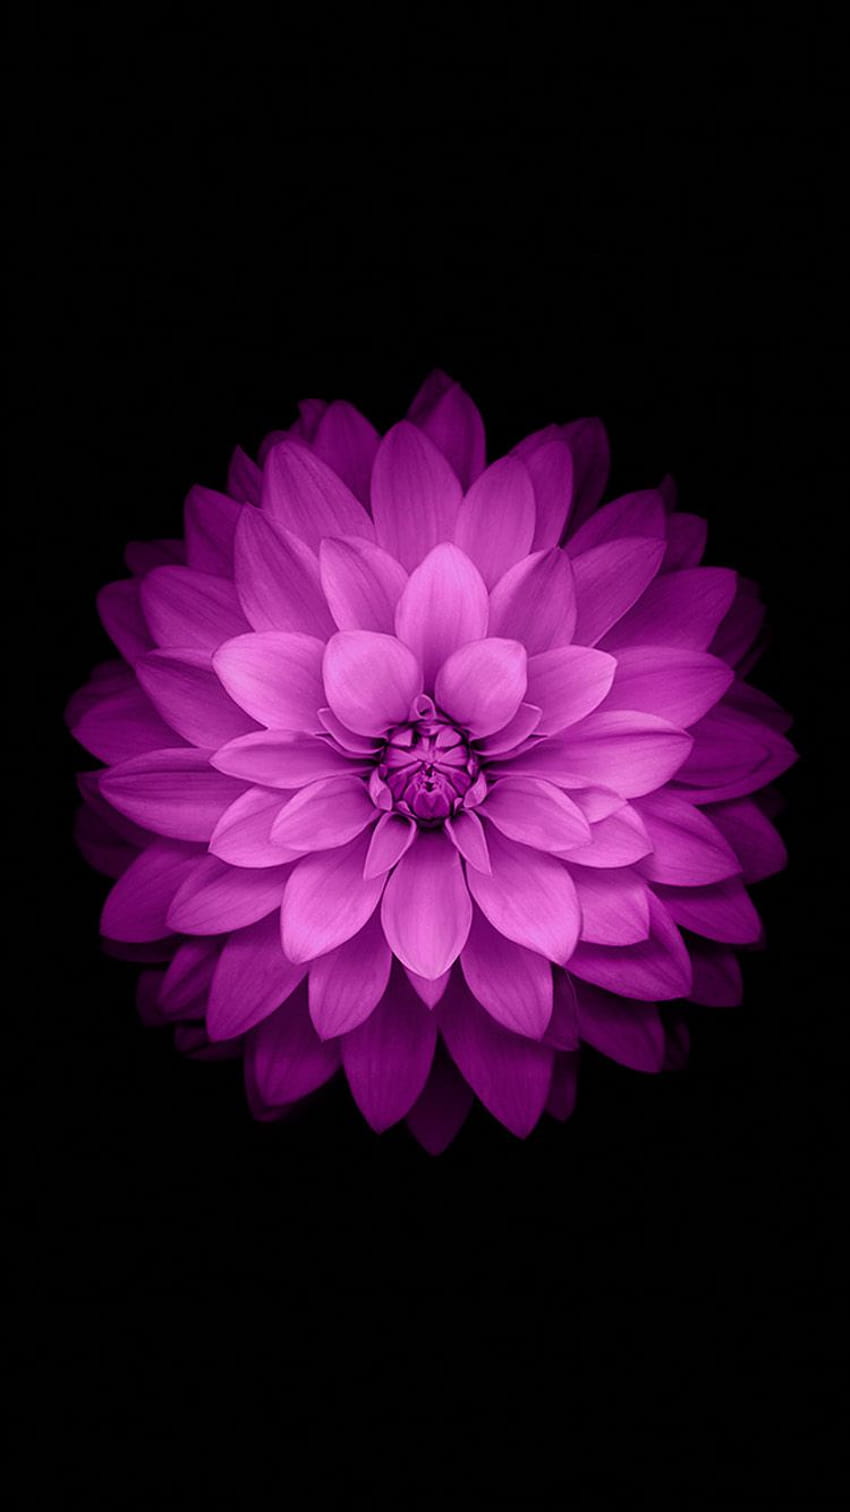 5 Purple Flower for iPhone, flowers iphone HD phone wallpaper